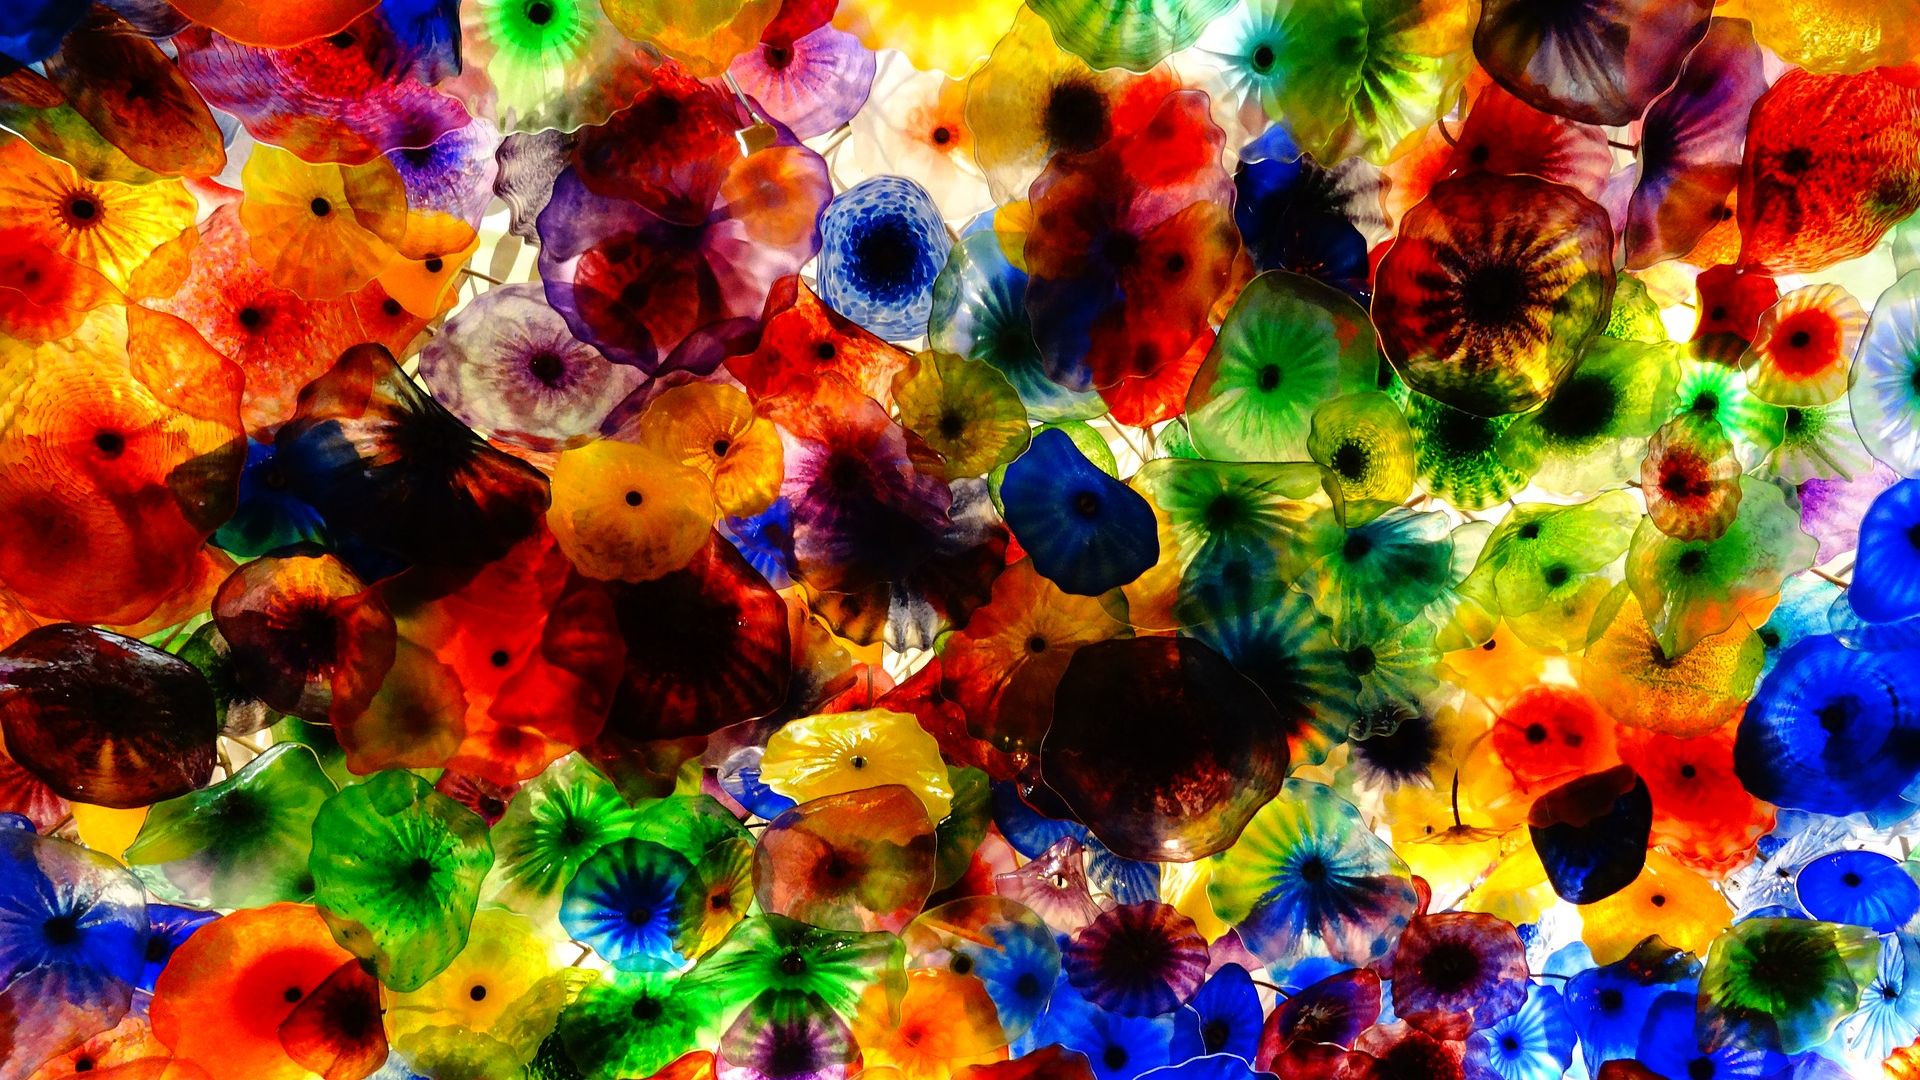 Wallpaper Chihuly glass, colorful